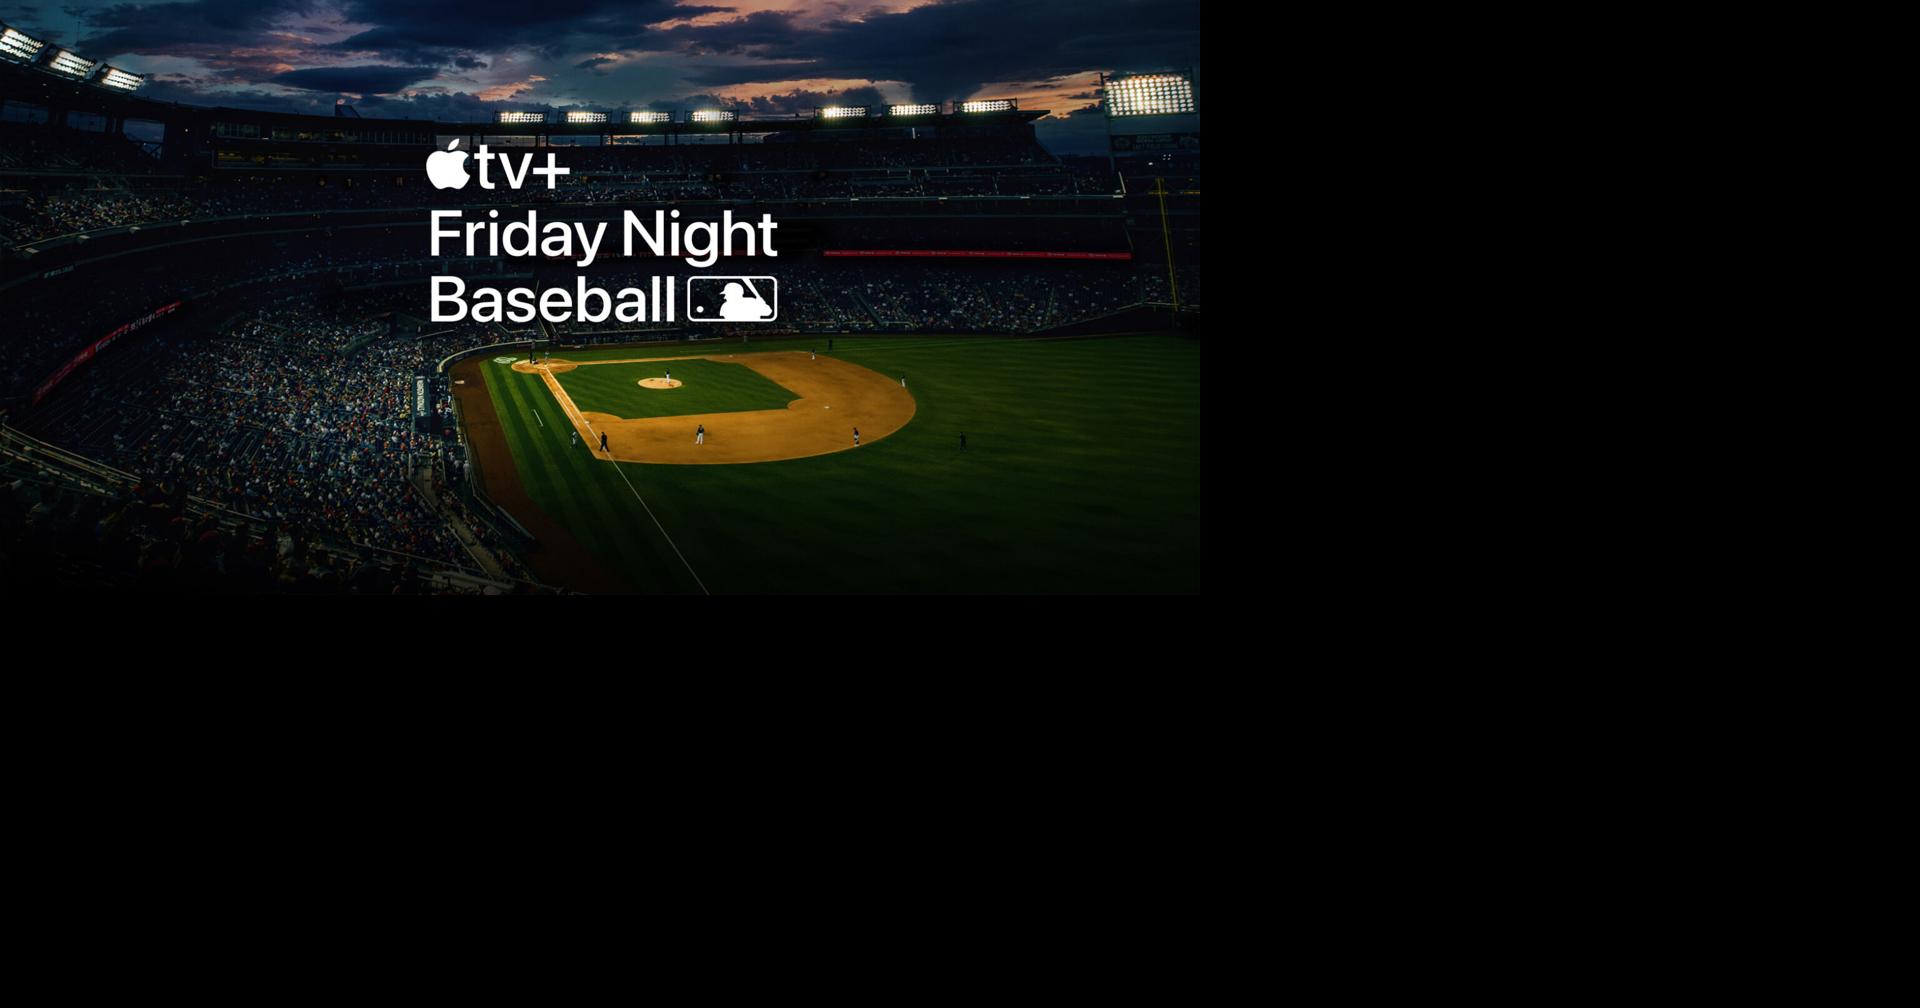 Friday's Cardinals-Cubs game only on Apple TV+